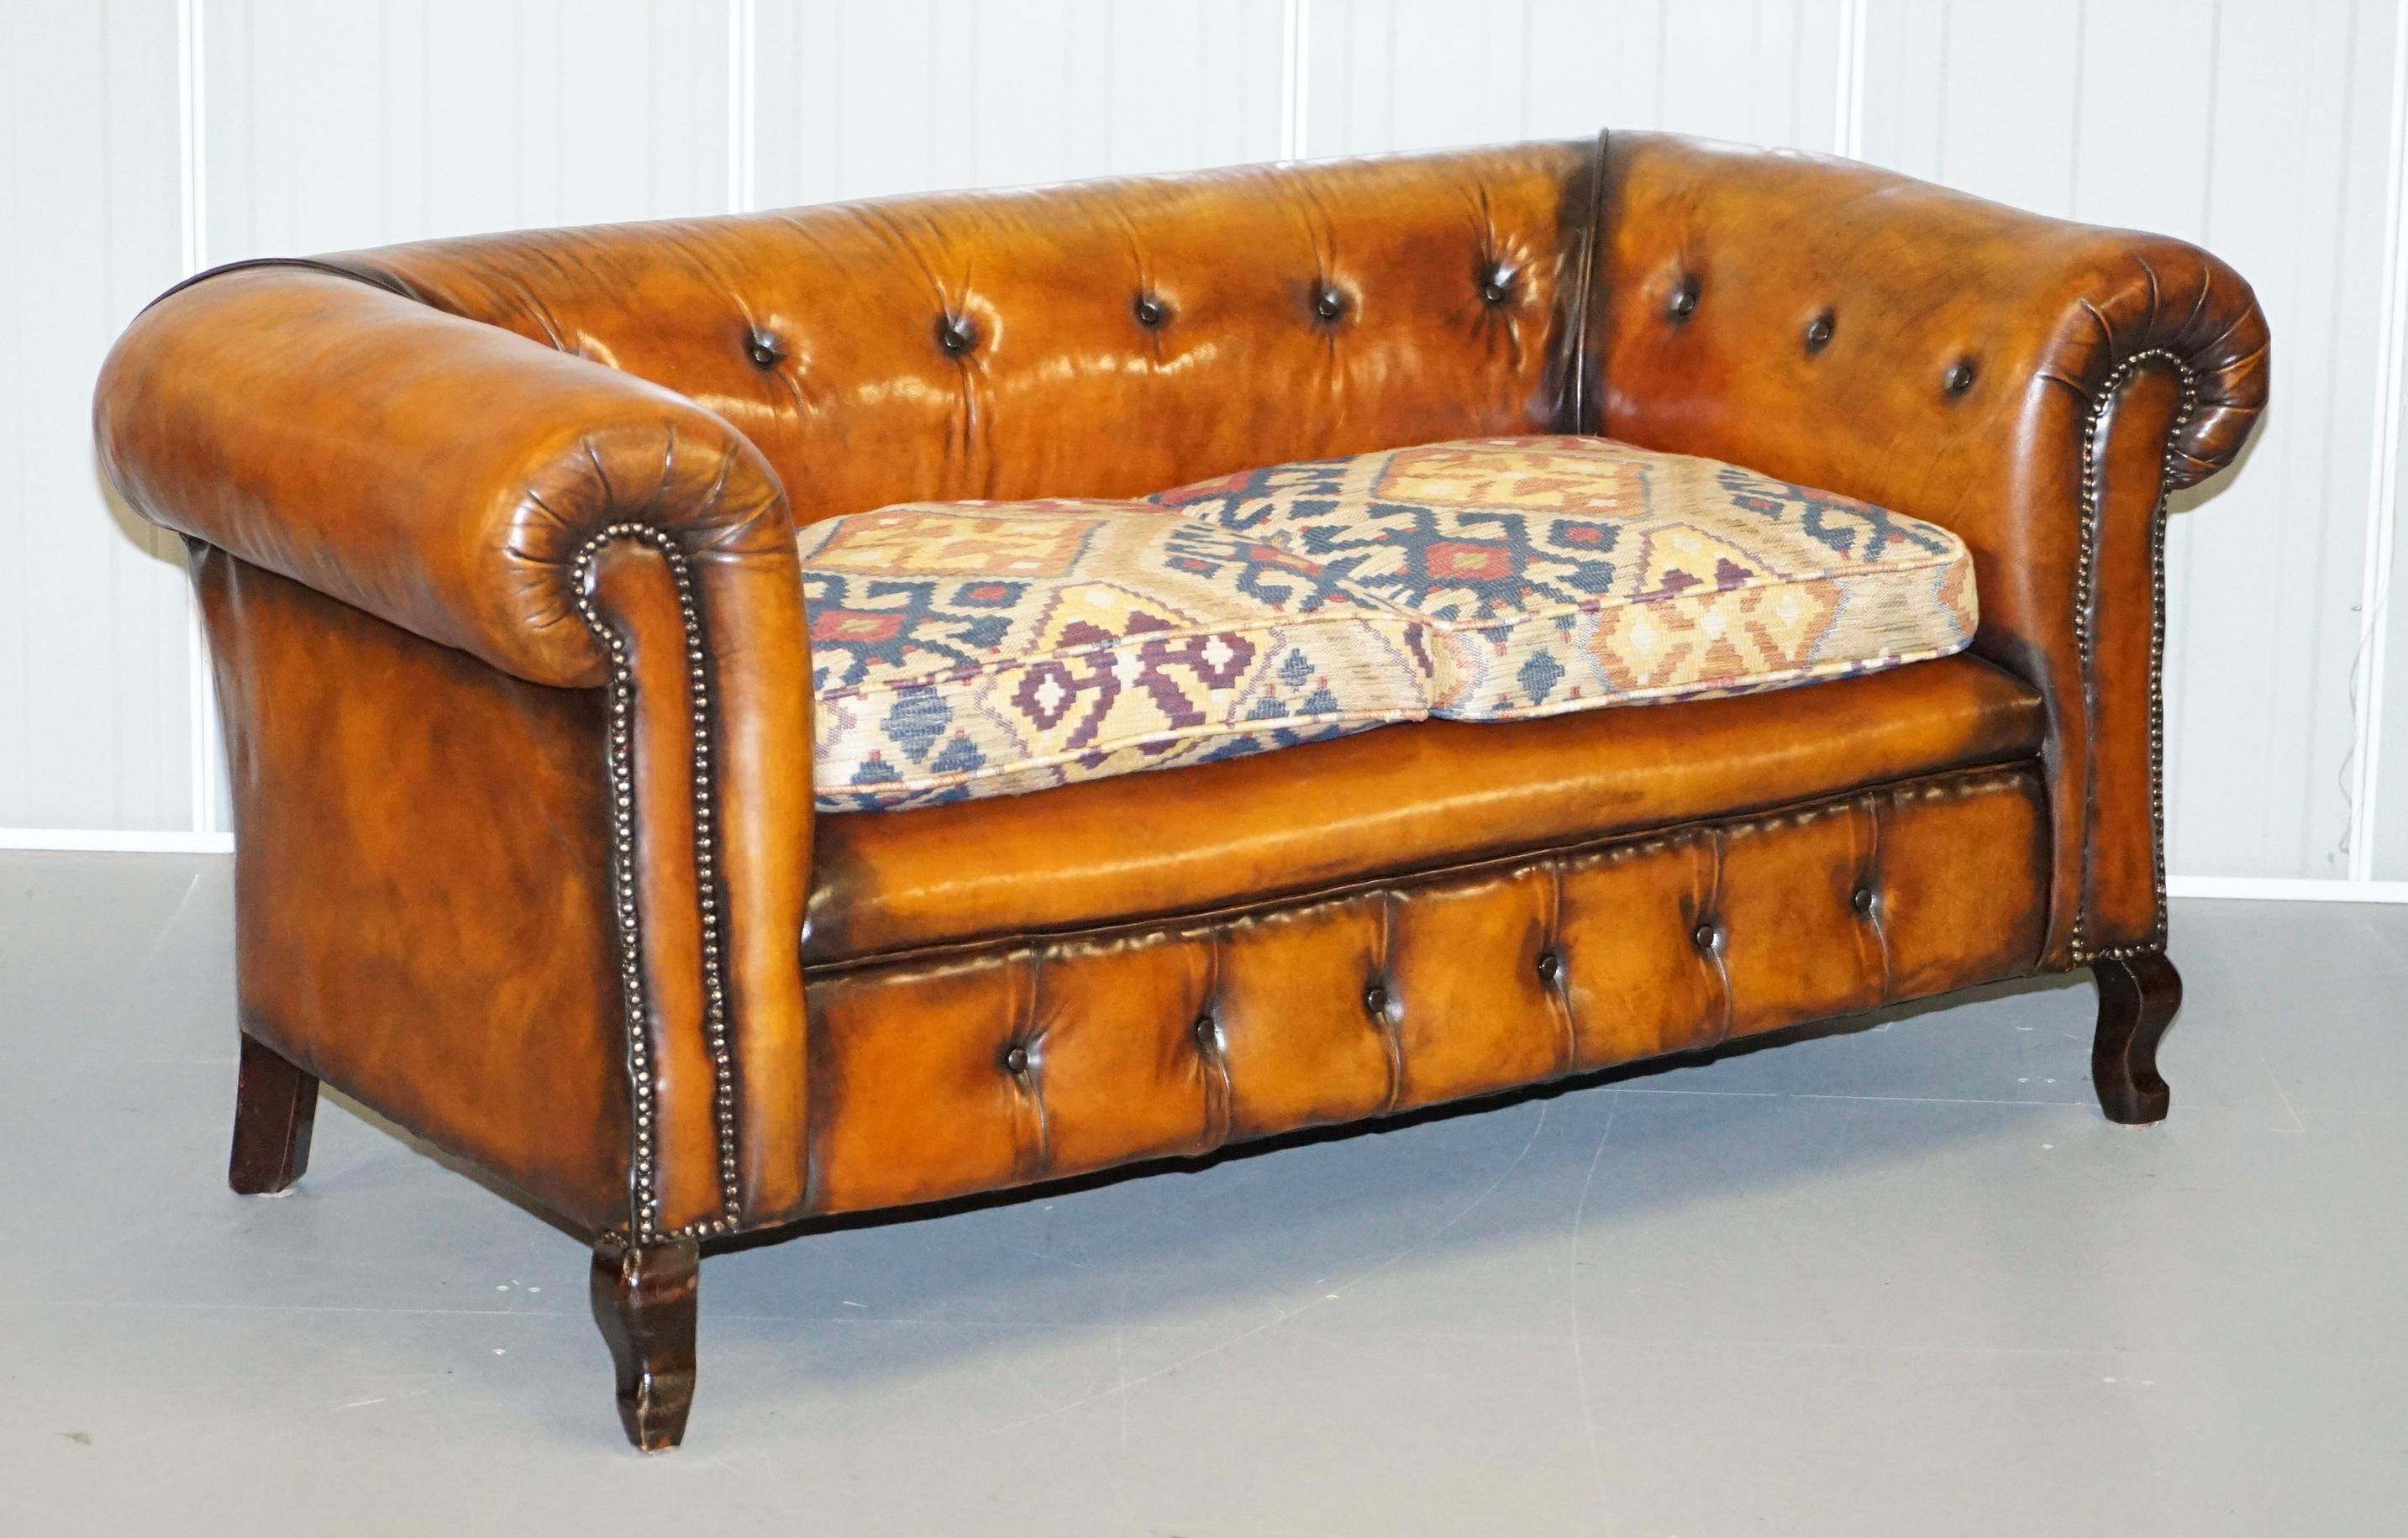 Wimbledon-Furniture

Wimbledon-Furniture is delighted to offer for sale this pair of fully restored hand dyed whisky brown leather Chesterfield sofas with kilim upholstered cushions

Please note the delivery fee listed is just a guide, it covers